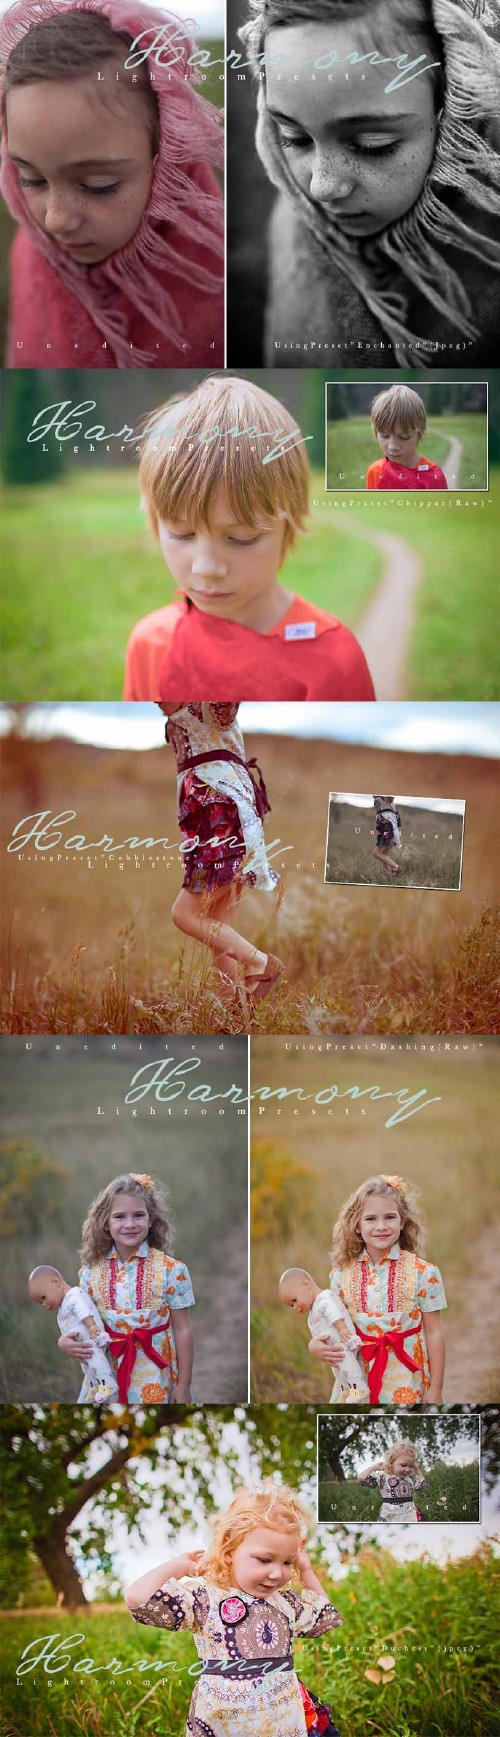 M4H Harmony Lightroom Presets Collection